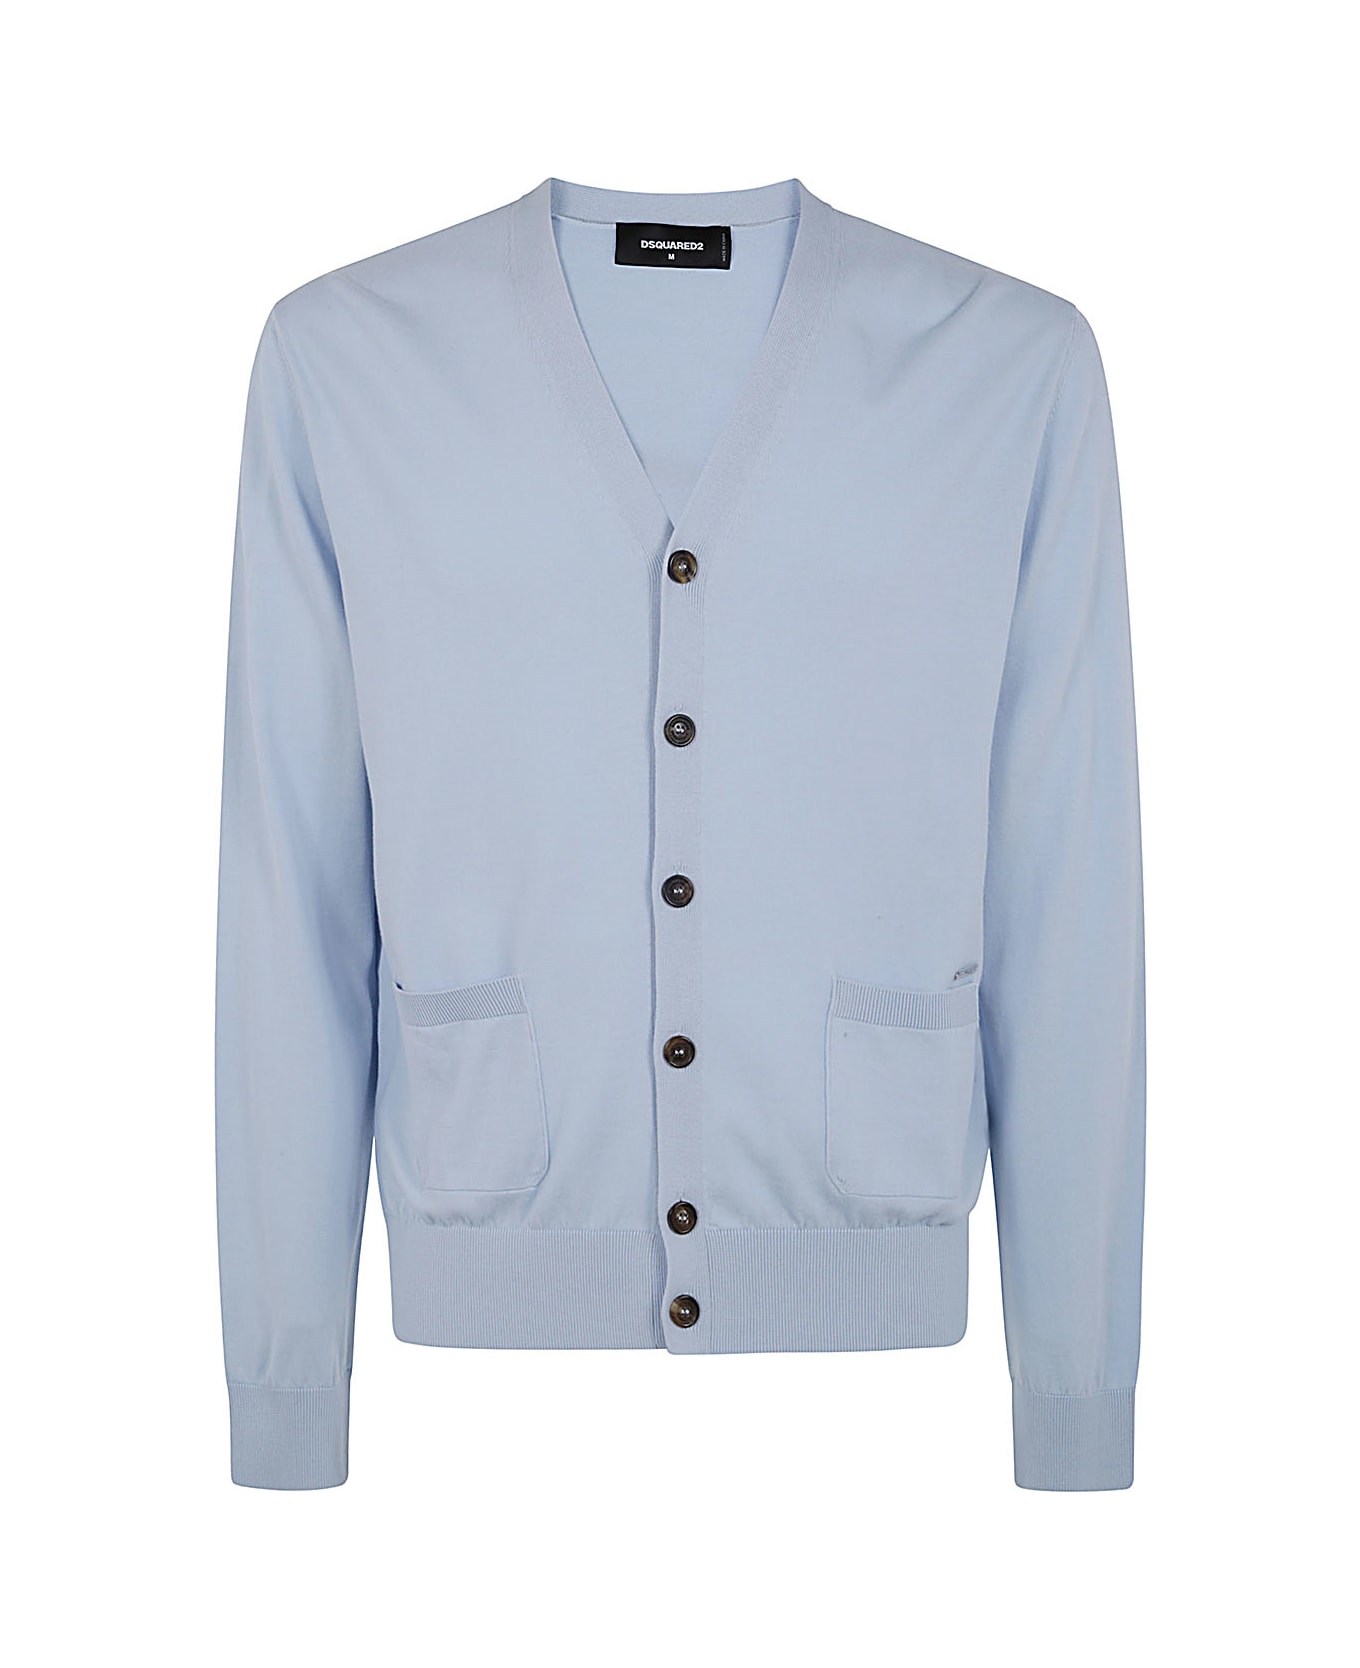 Dsquared2 Knit Cardigan - Blue Bell